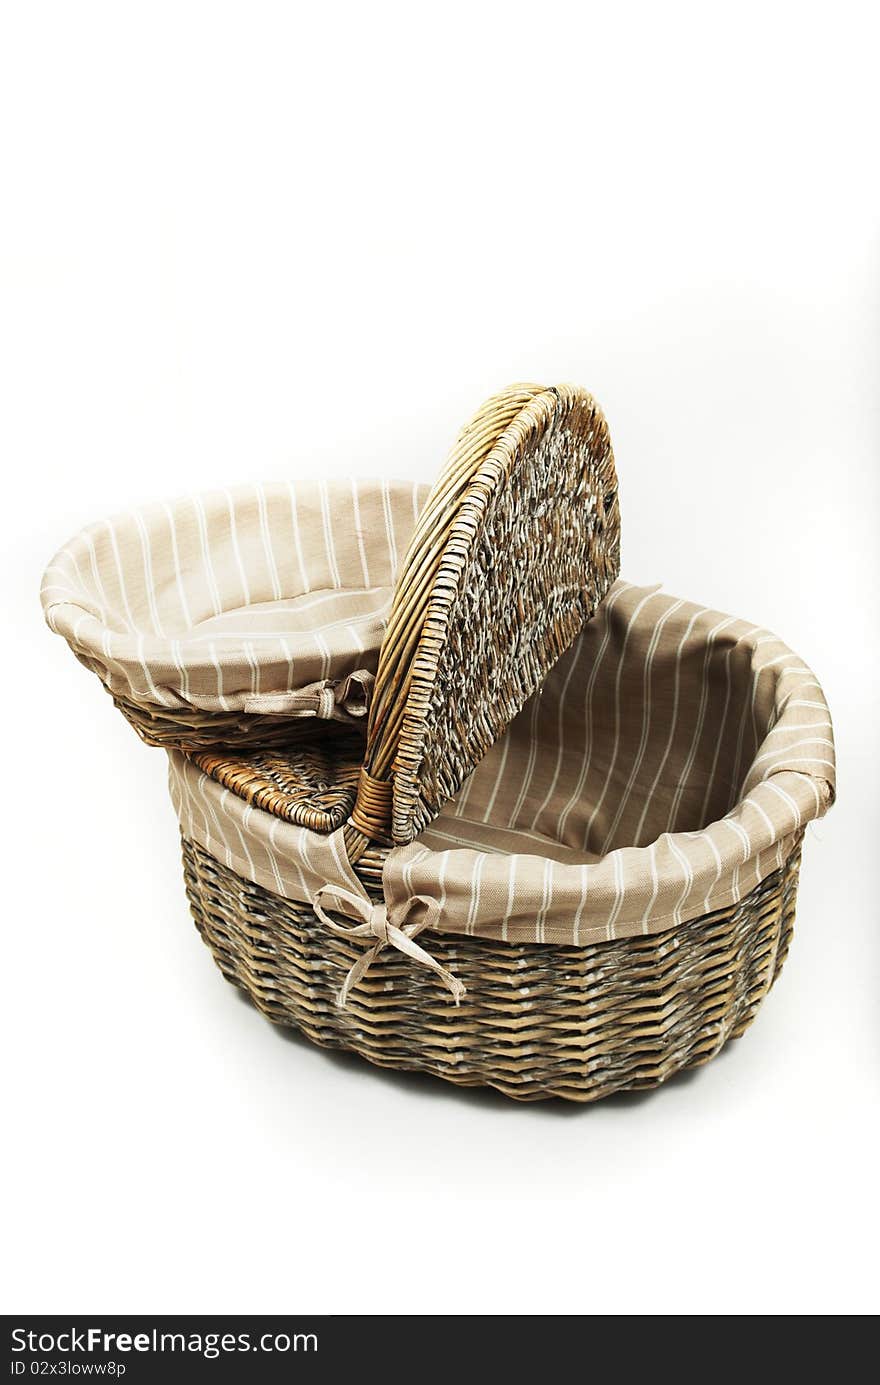 A set of twig baskets lined with textile on the interior used for picnics. A set of twig baskets lined with textile on the interior used for picnics.